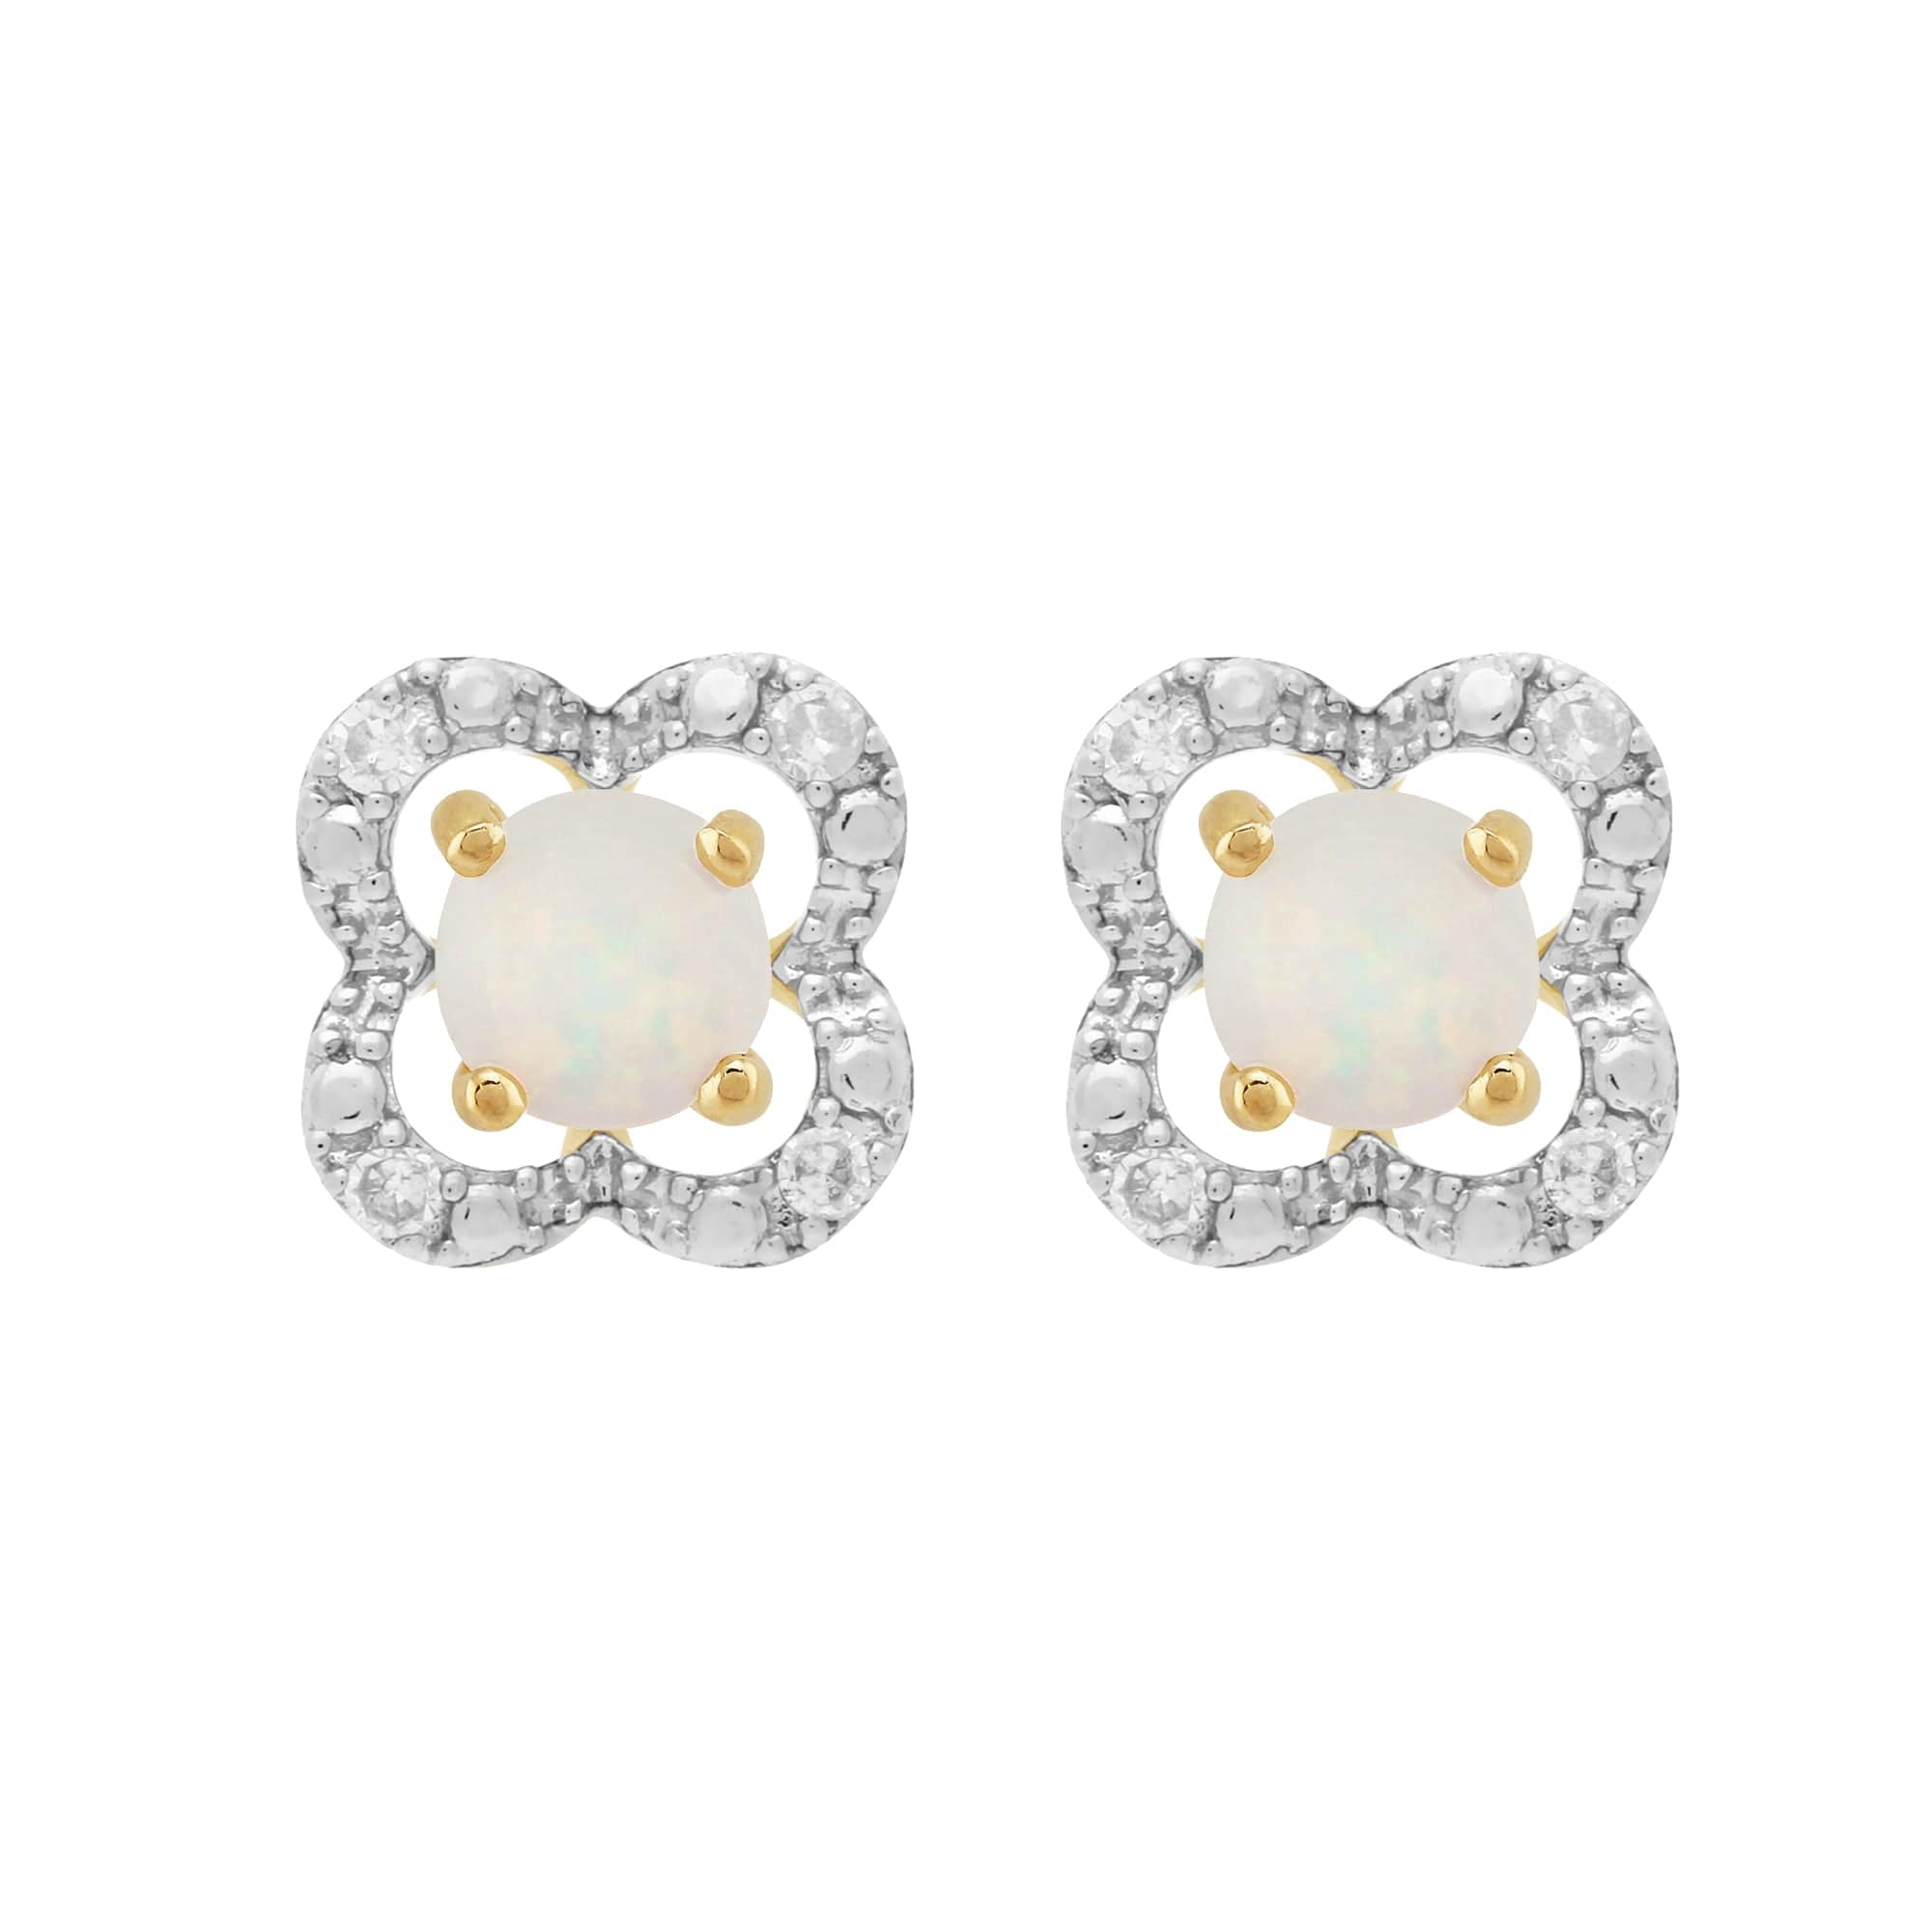 26942-191E0375019 Classic Round Opal Stud Earrings with Detachable Diamond Floral Ear Jacket in 9ct Yellow Gold 1